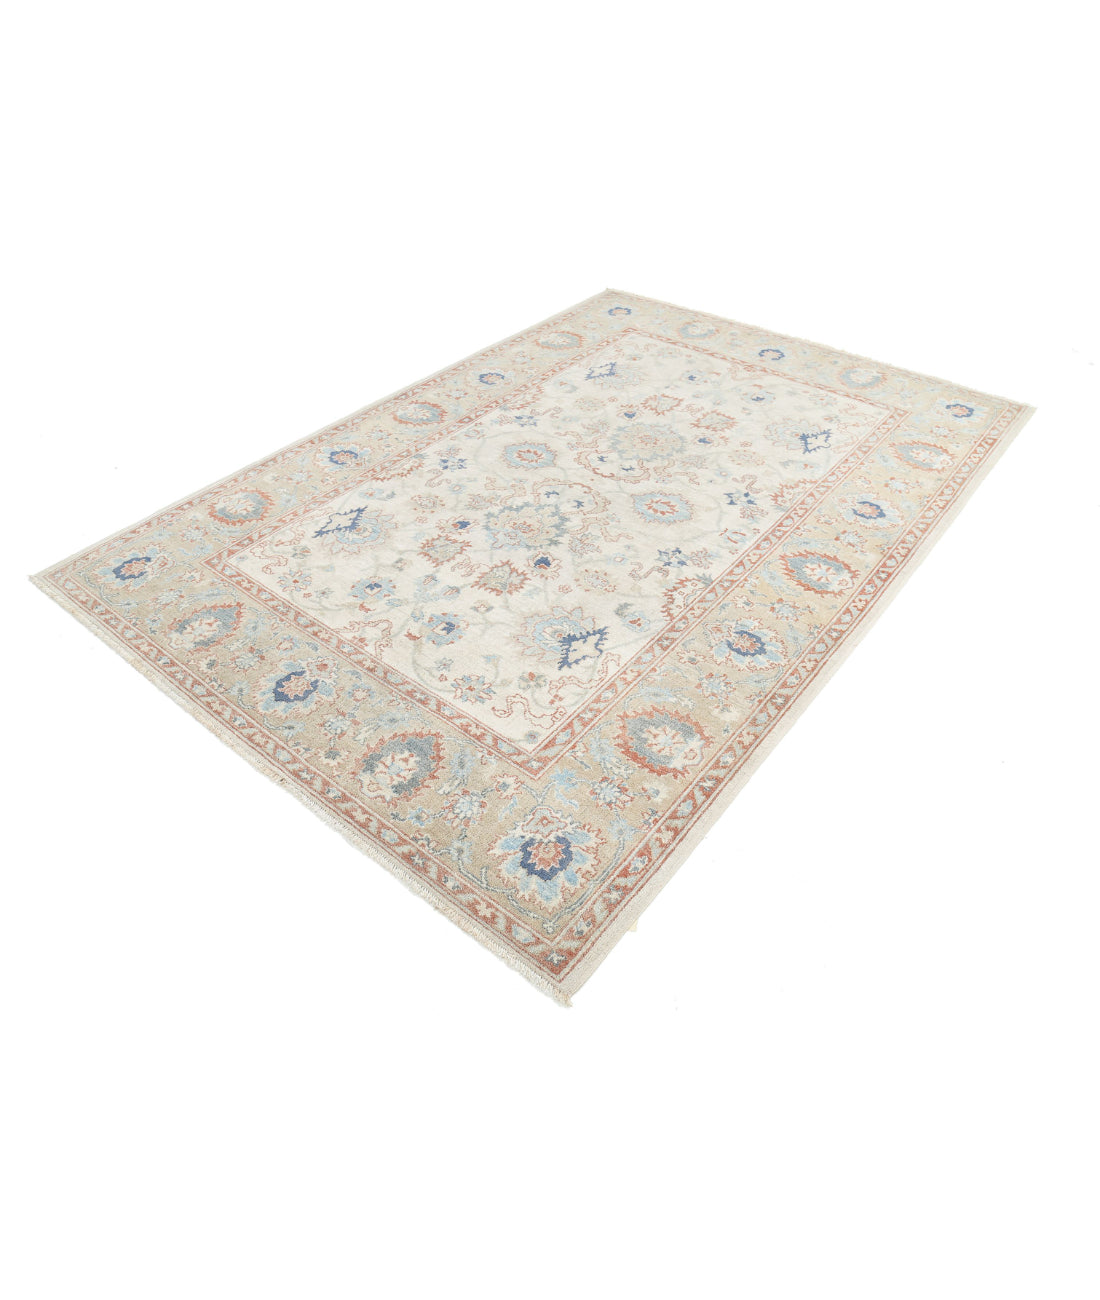 Hand Knotted Serenity Wool Rug - 6'1'' x 8'8'' 6'1'' x 8'8'' (183 X 260) / Ivory / Beige